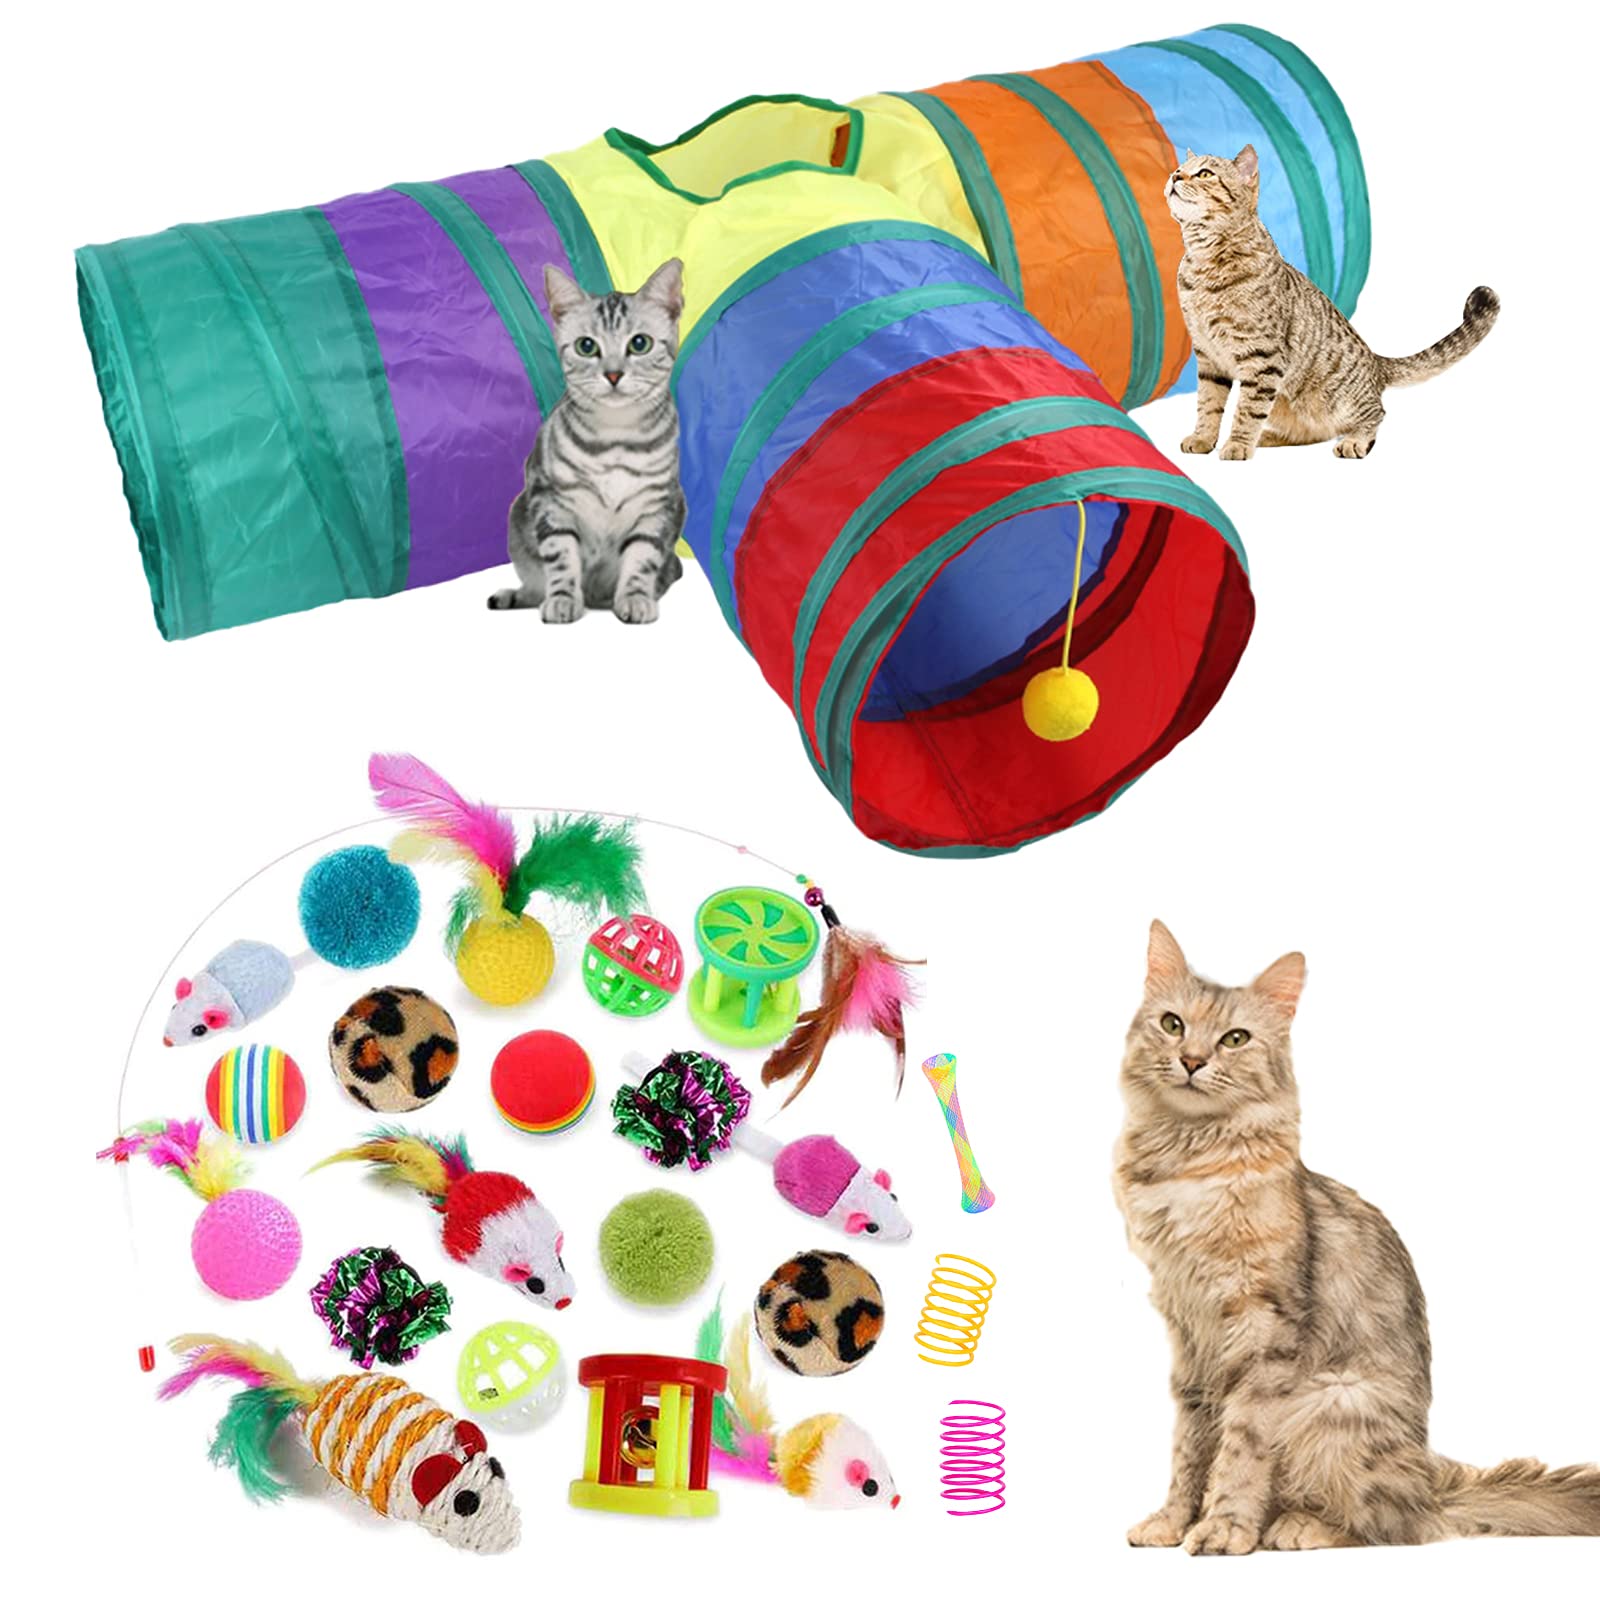 Goopow Cat Toys Kitten Toys, Interactive Cat Toy Including Worm Toy, Feather Tassel,Catnip Fish, Balls and Bells Toys Set for Cat, Puppy, Kitty with